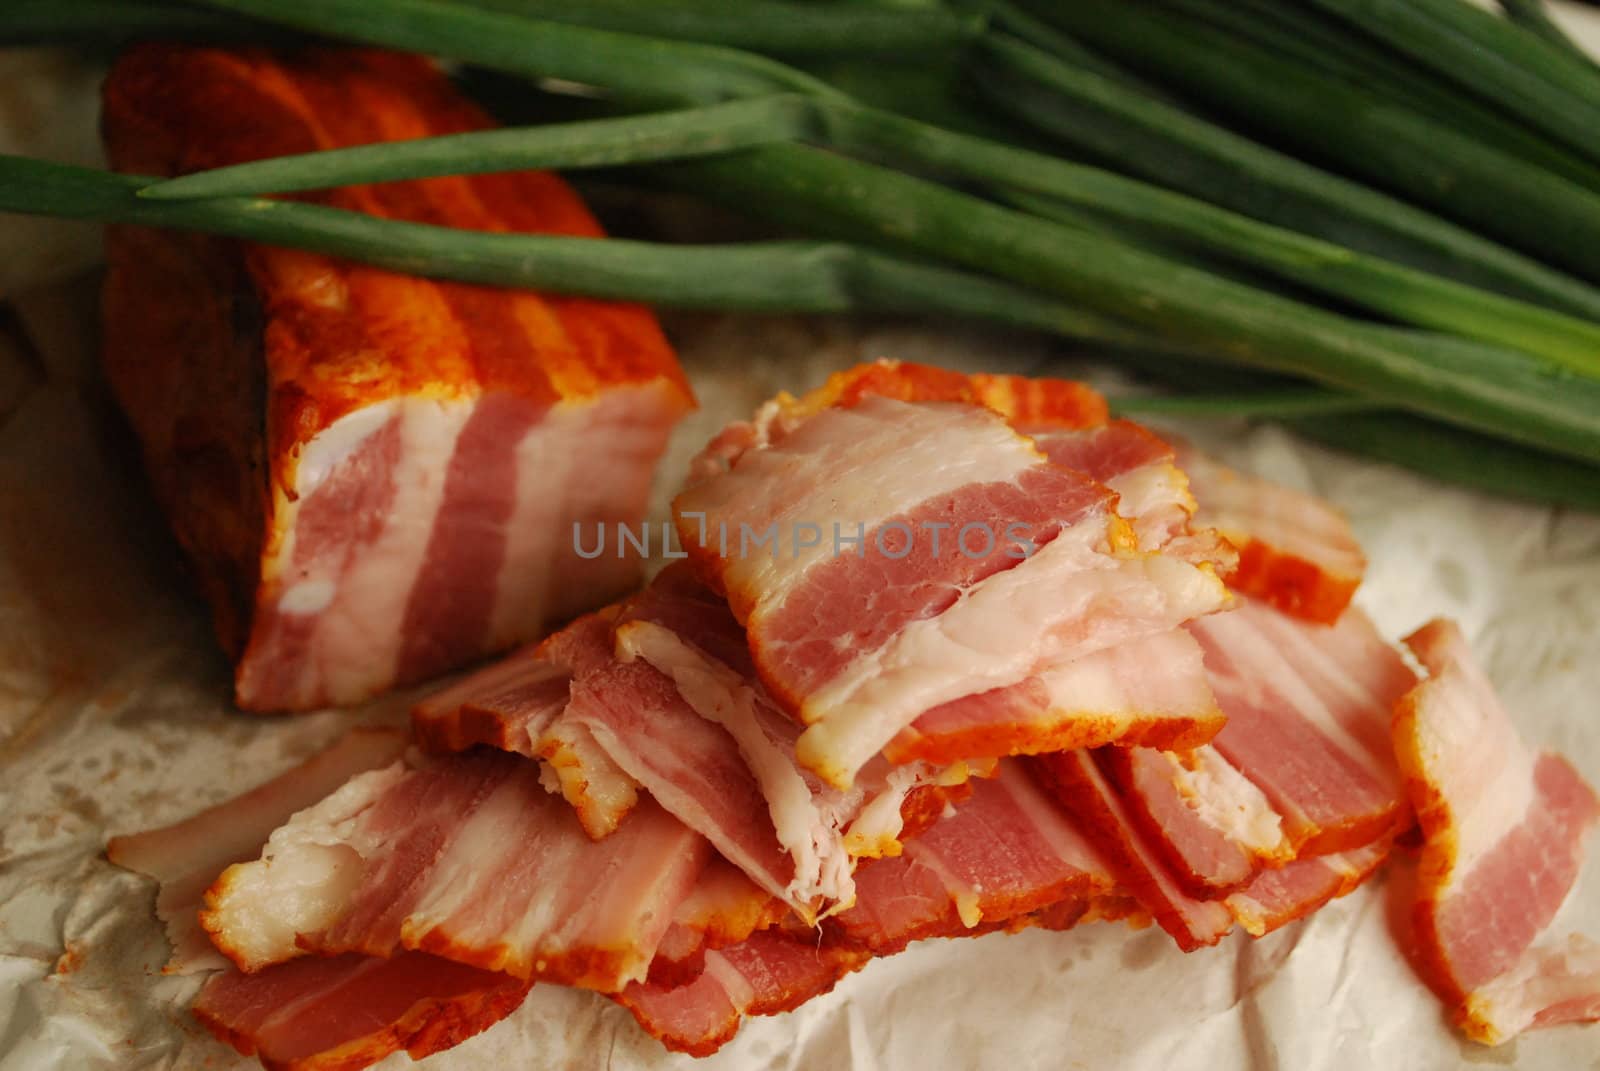 Bacon slices near a green onion on a paper
